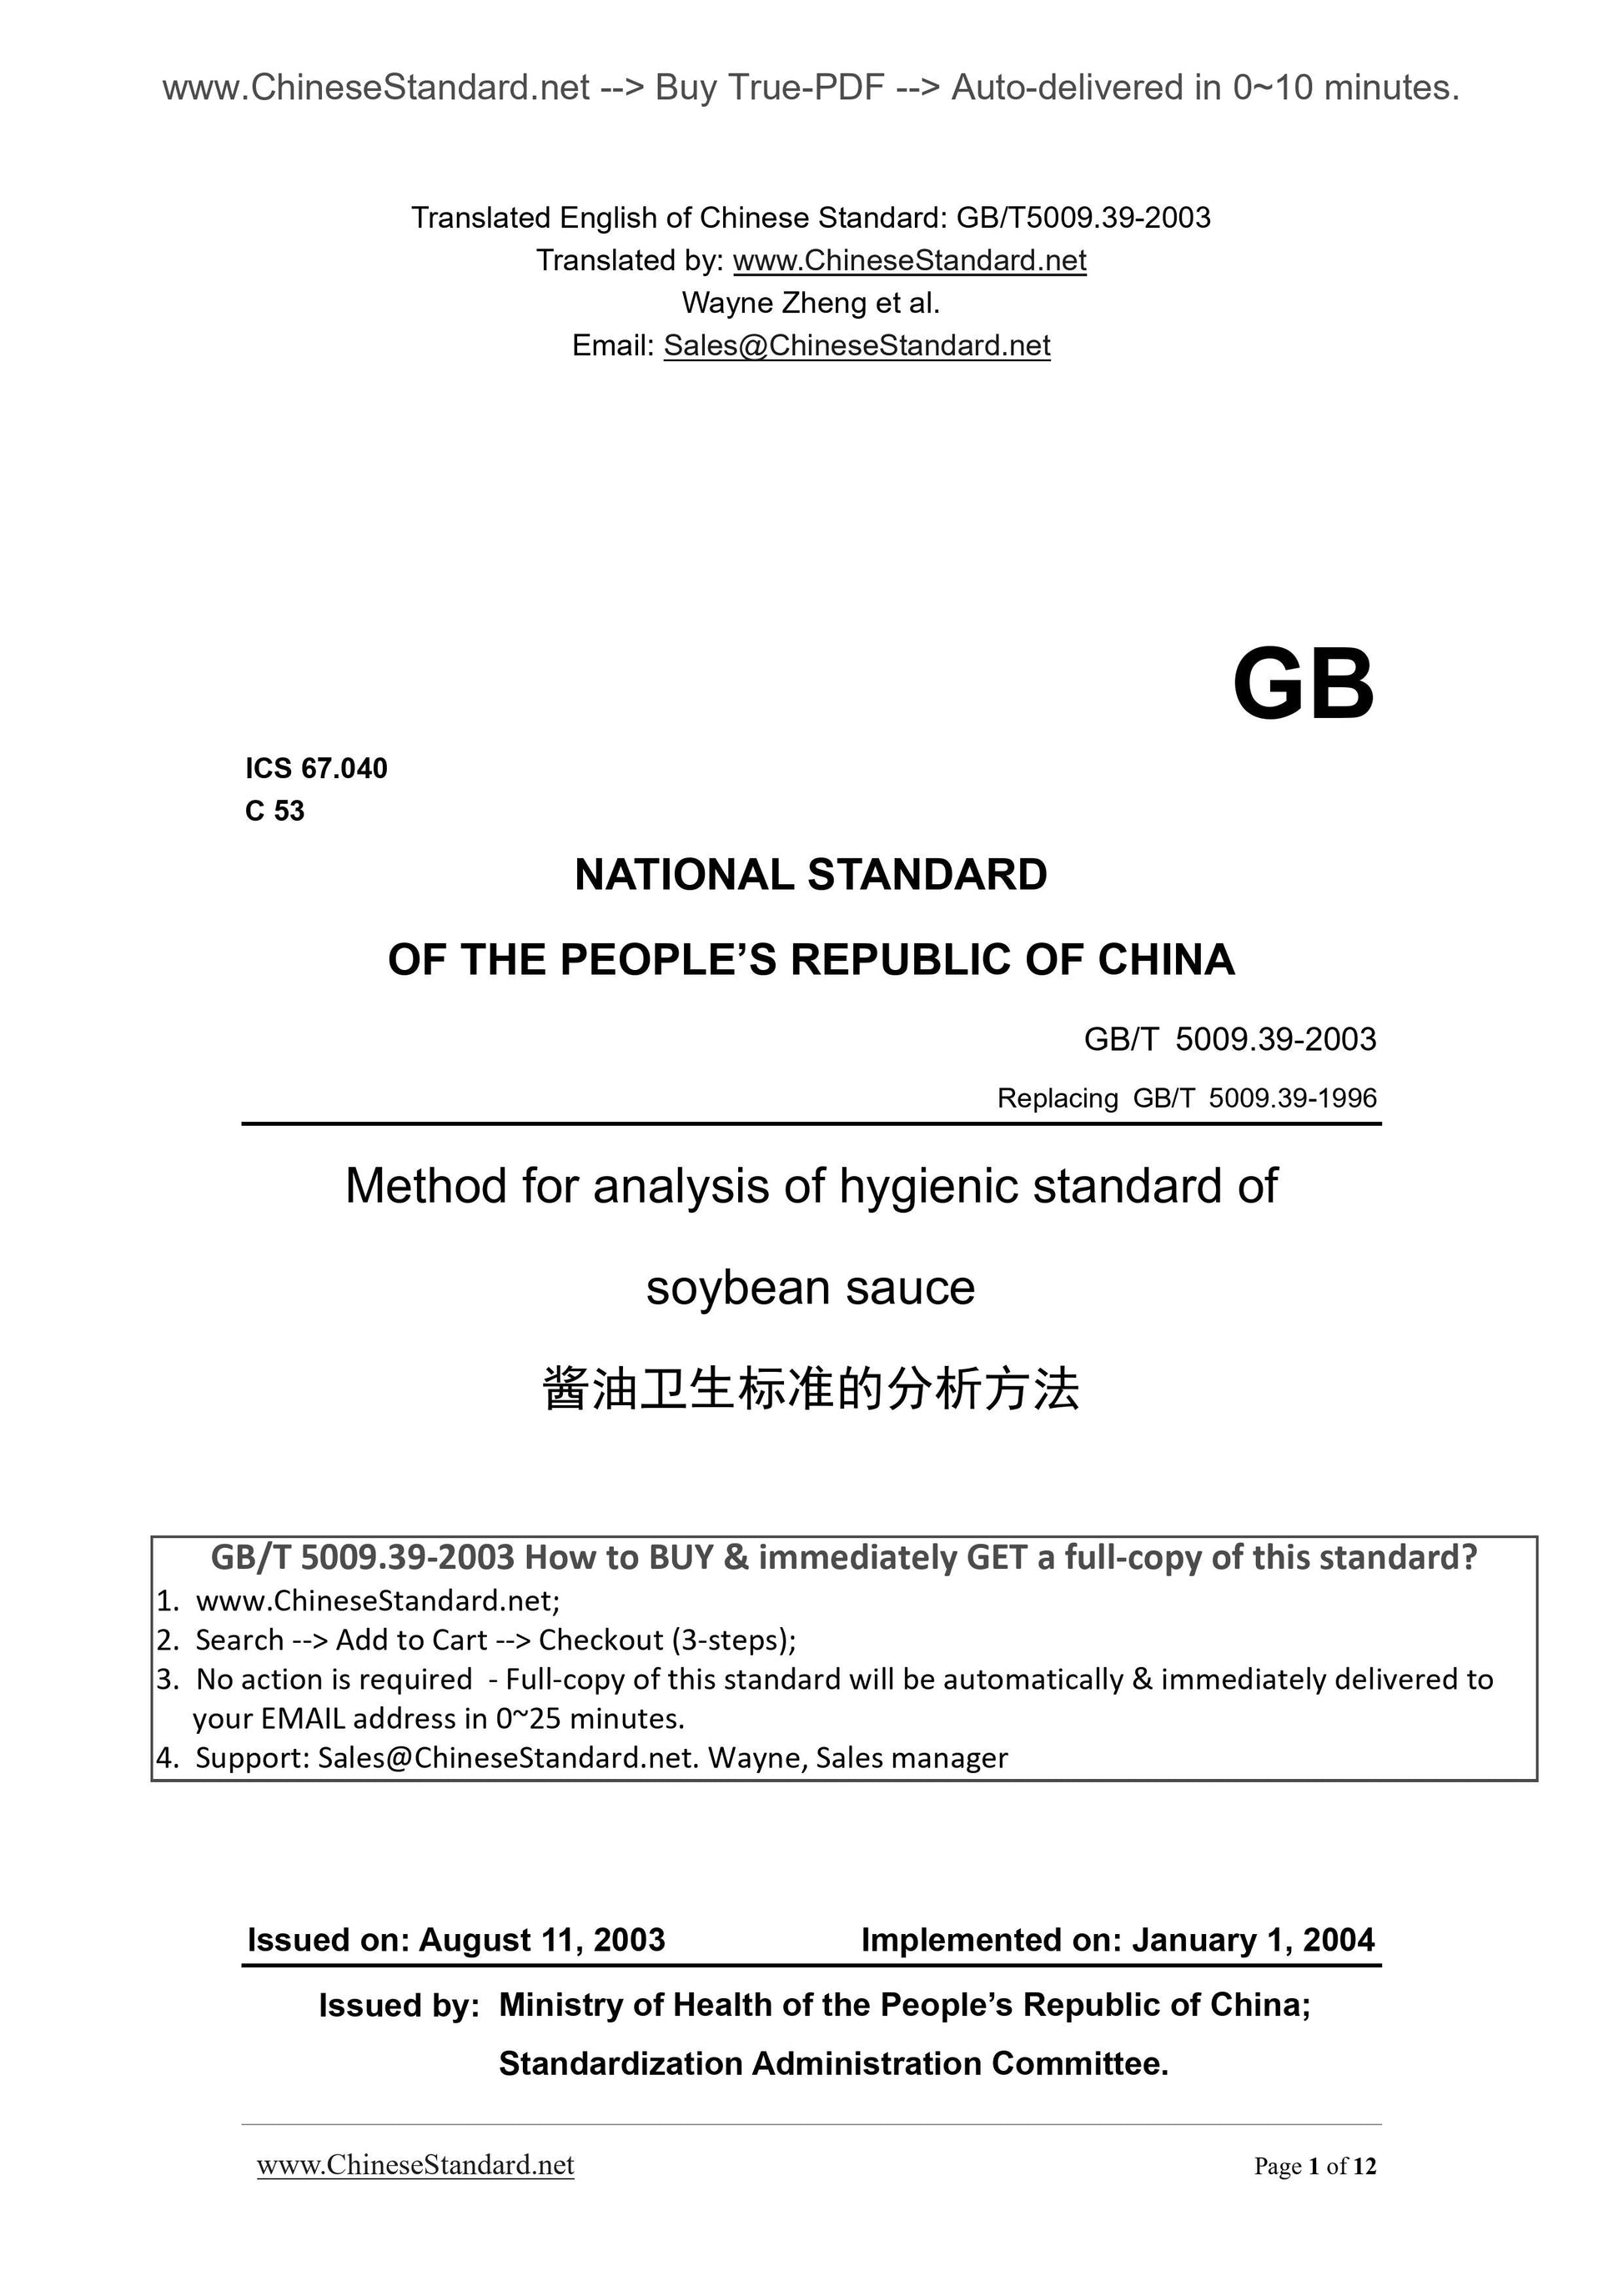 GB/T 5009.39-2003 Page 1